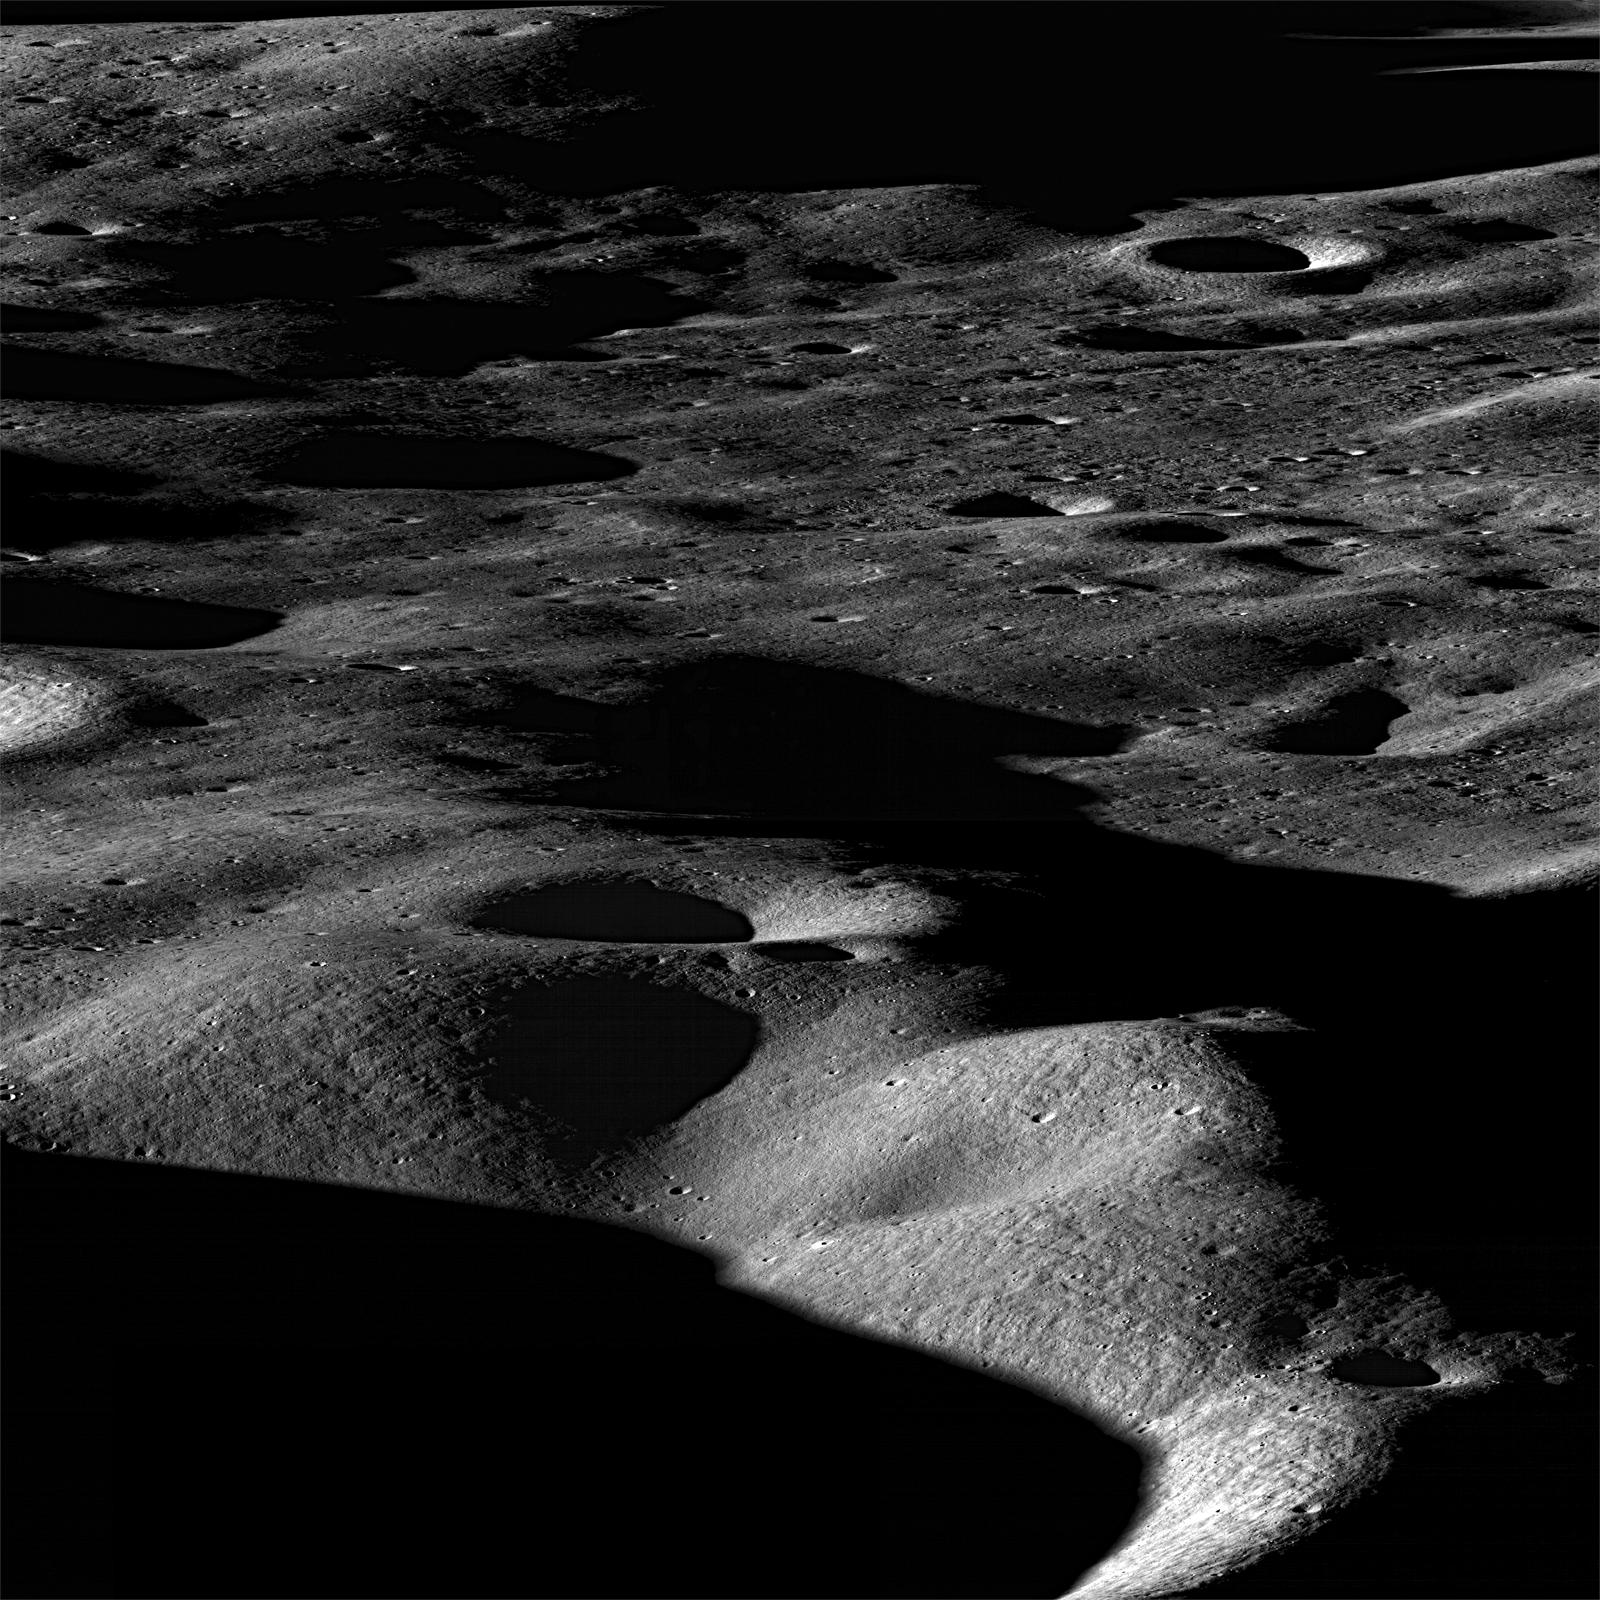 Most mountains on the Earth are formed as plates collide and the crust buckles. Not so for the Moon, where mountains are formed as a result of impacts as seen by NASA Lunar Reconnaissance Orbiter.